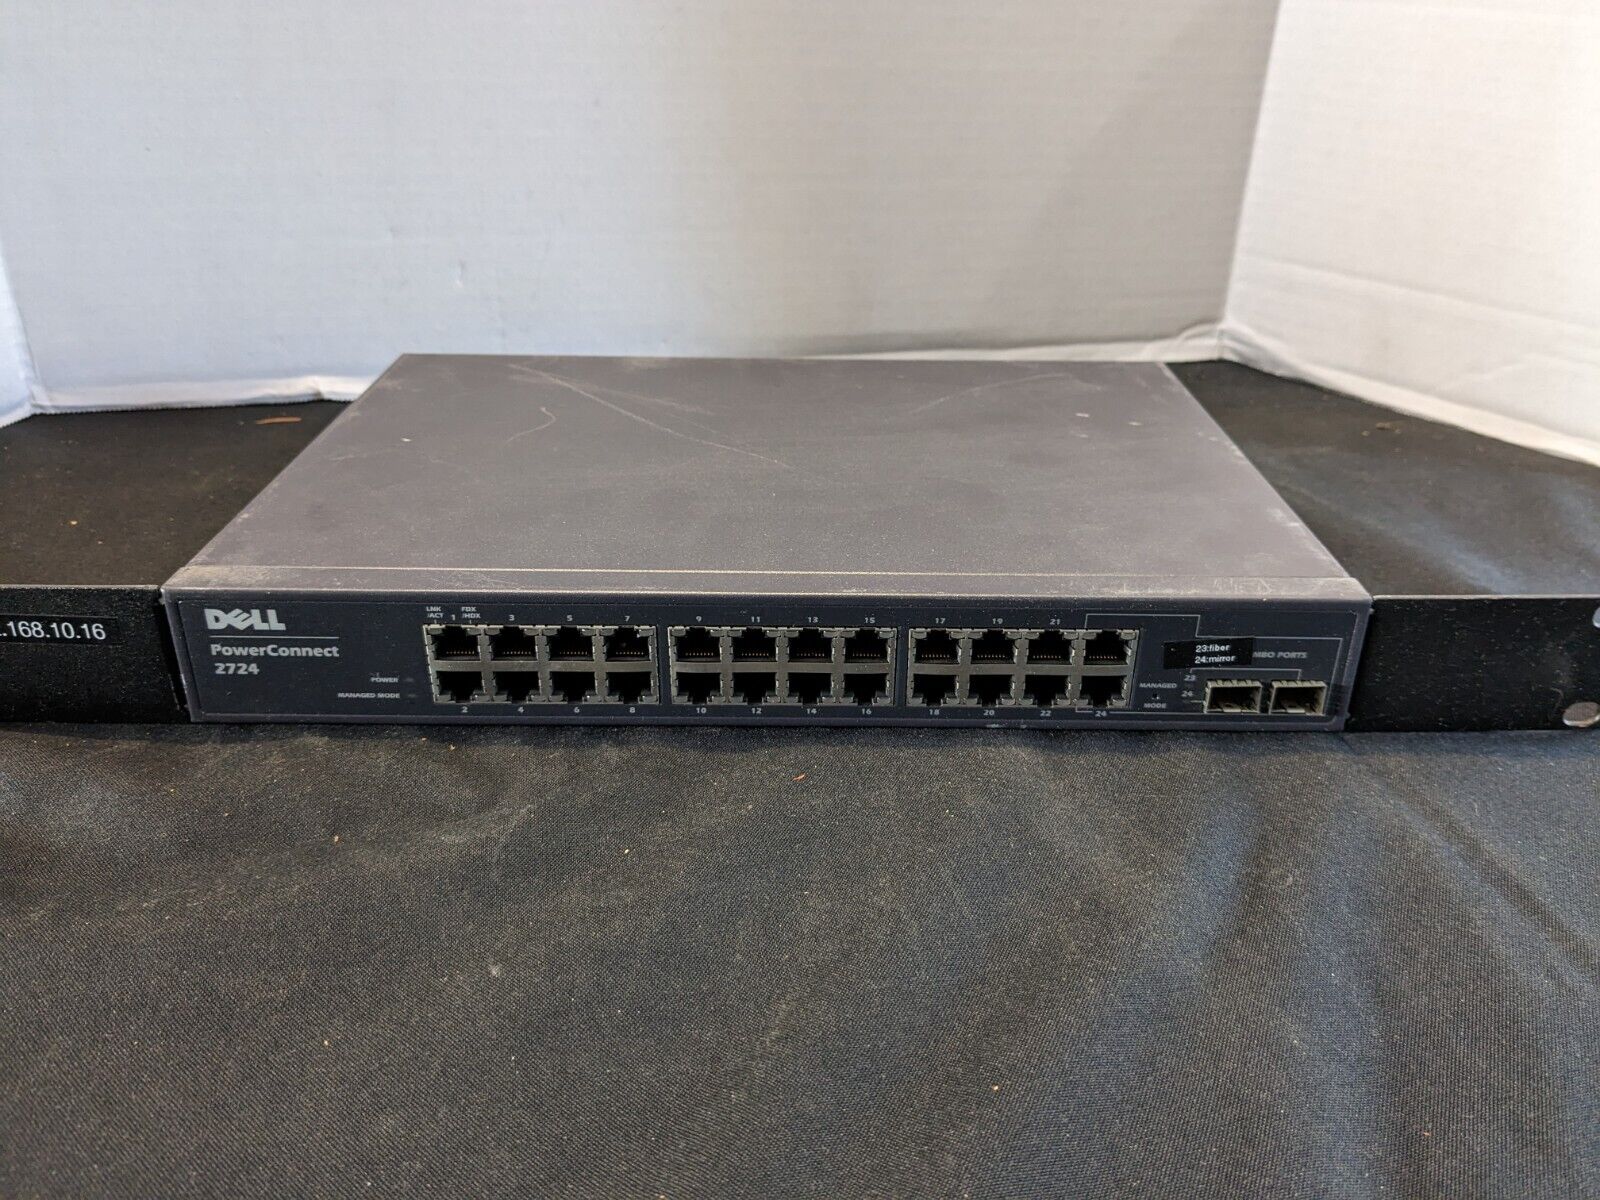 Dell PowerConnect 2724 J0632 24-Port Gigabit Managed Switch 